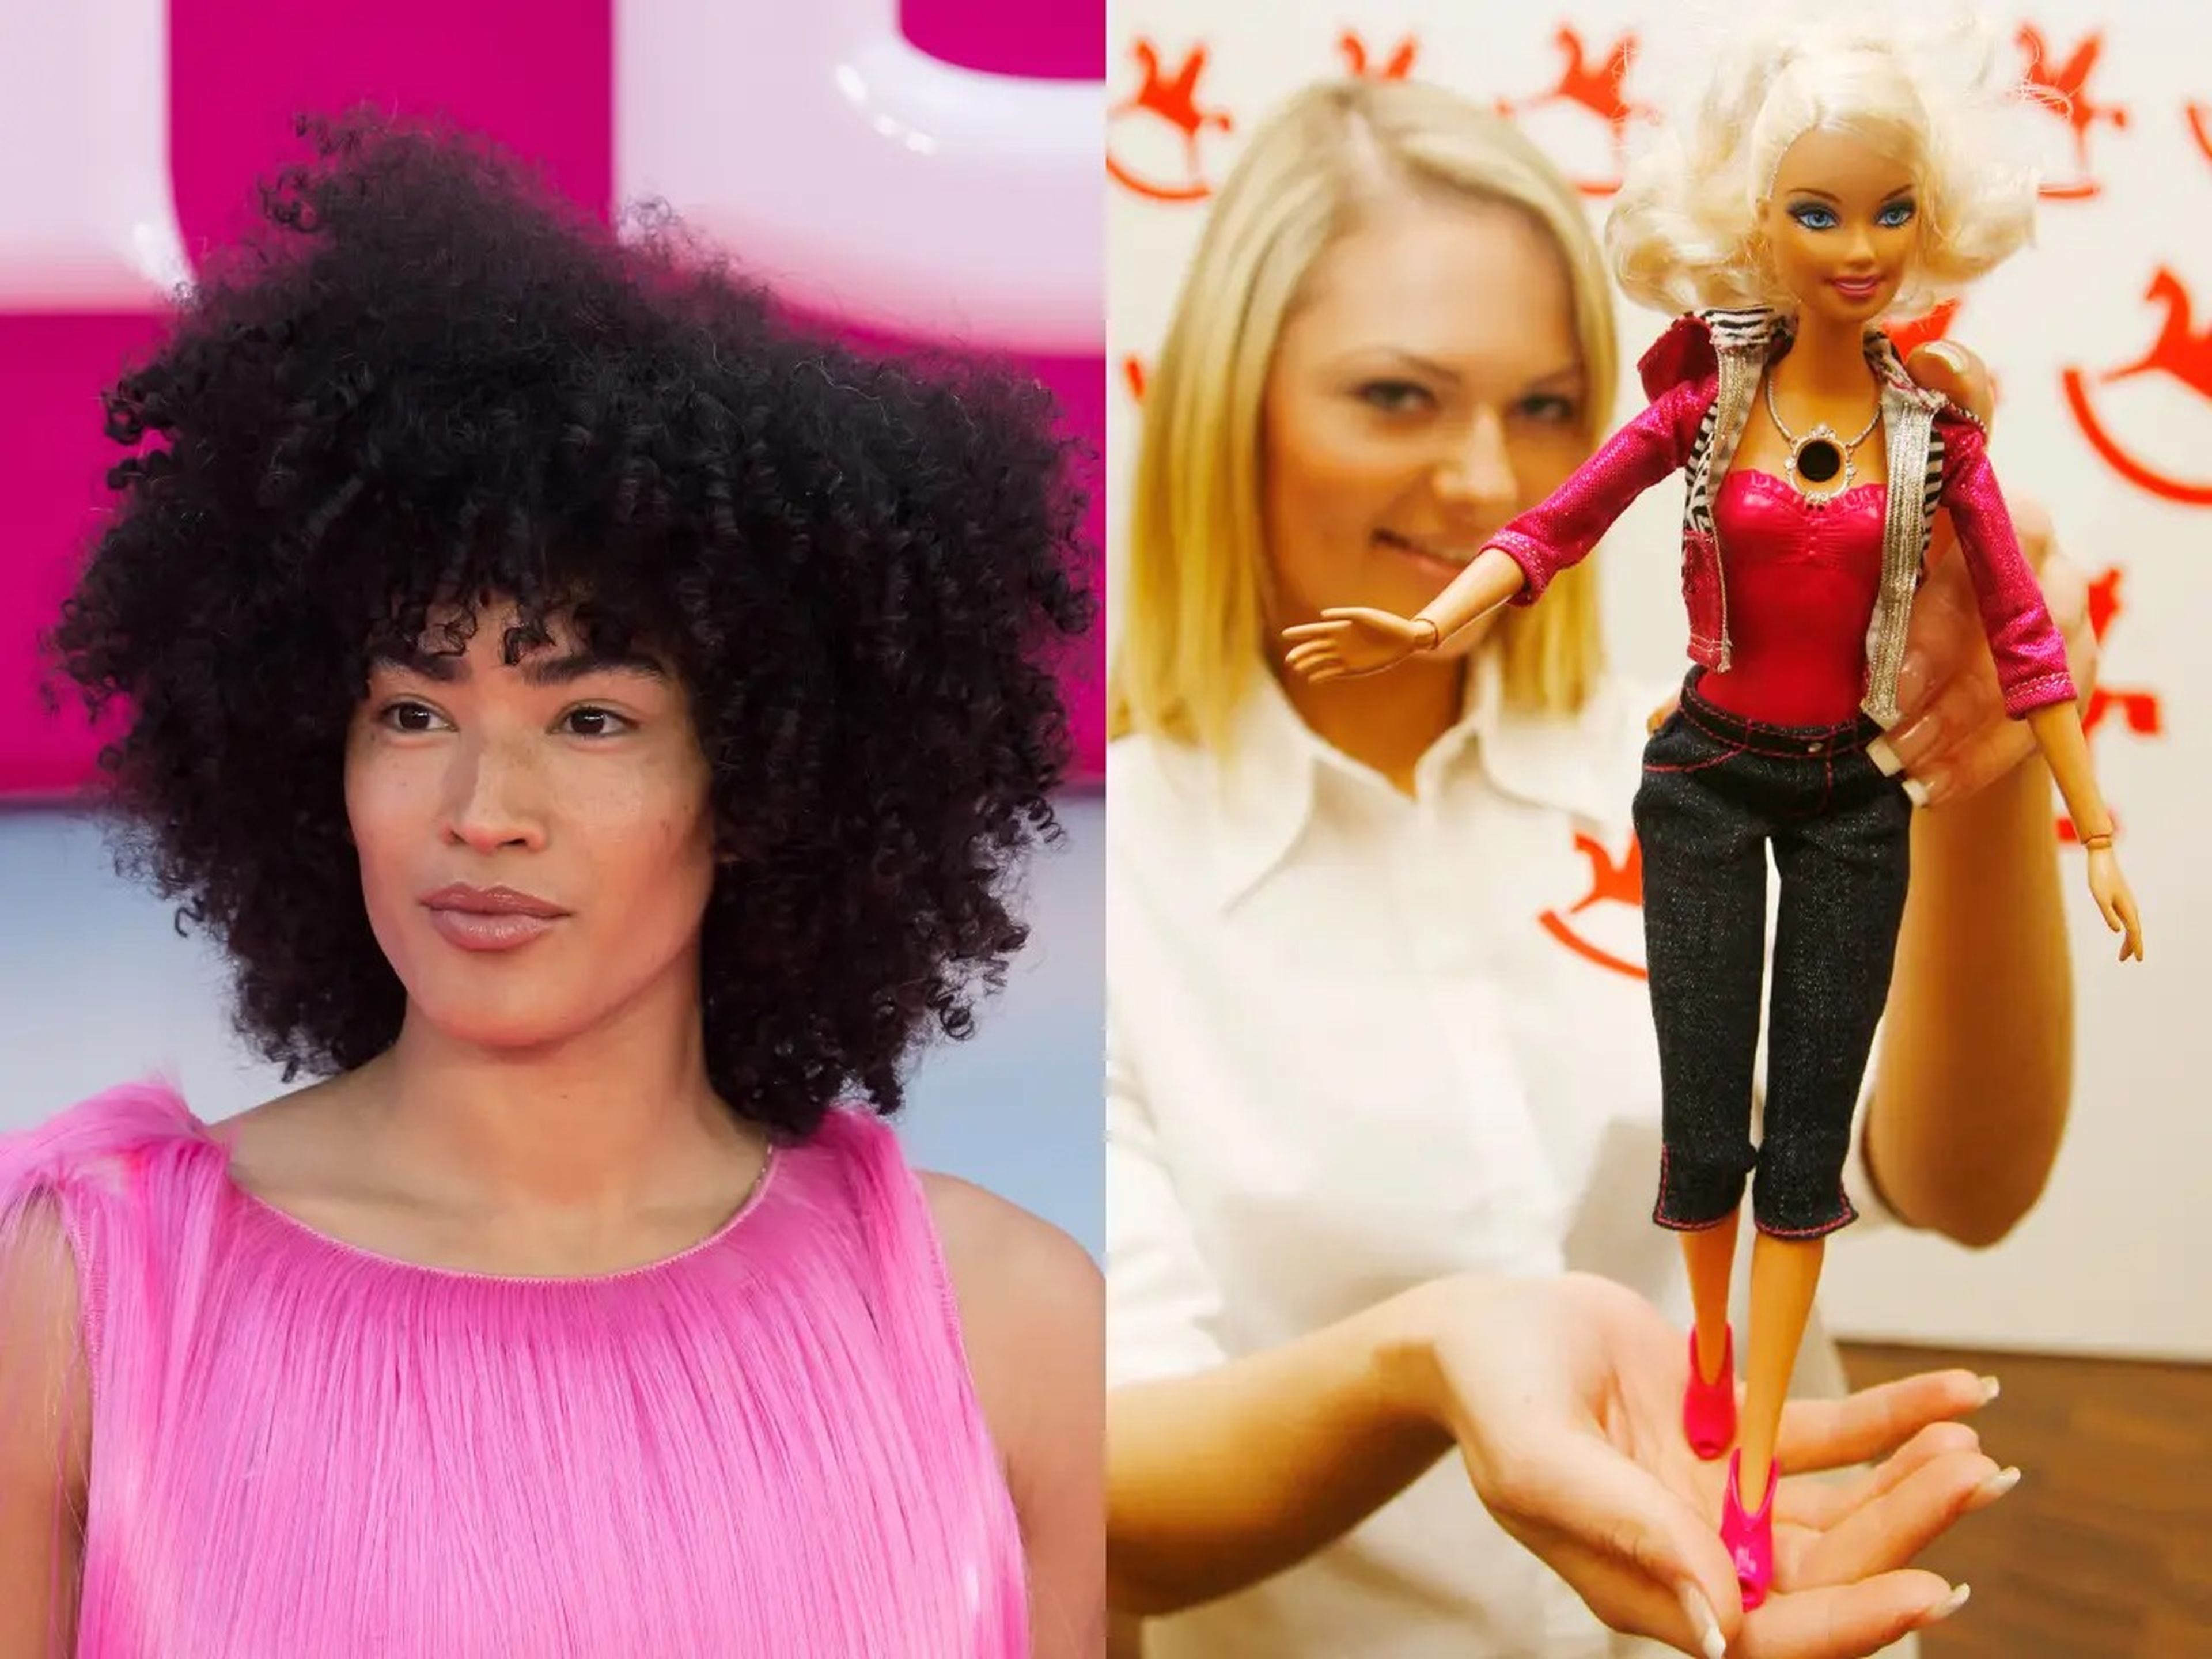 side-by-side of Mette Towley and a Video Girl Barbie doll